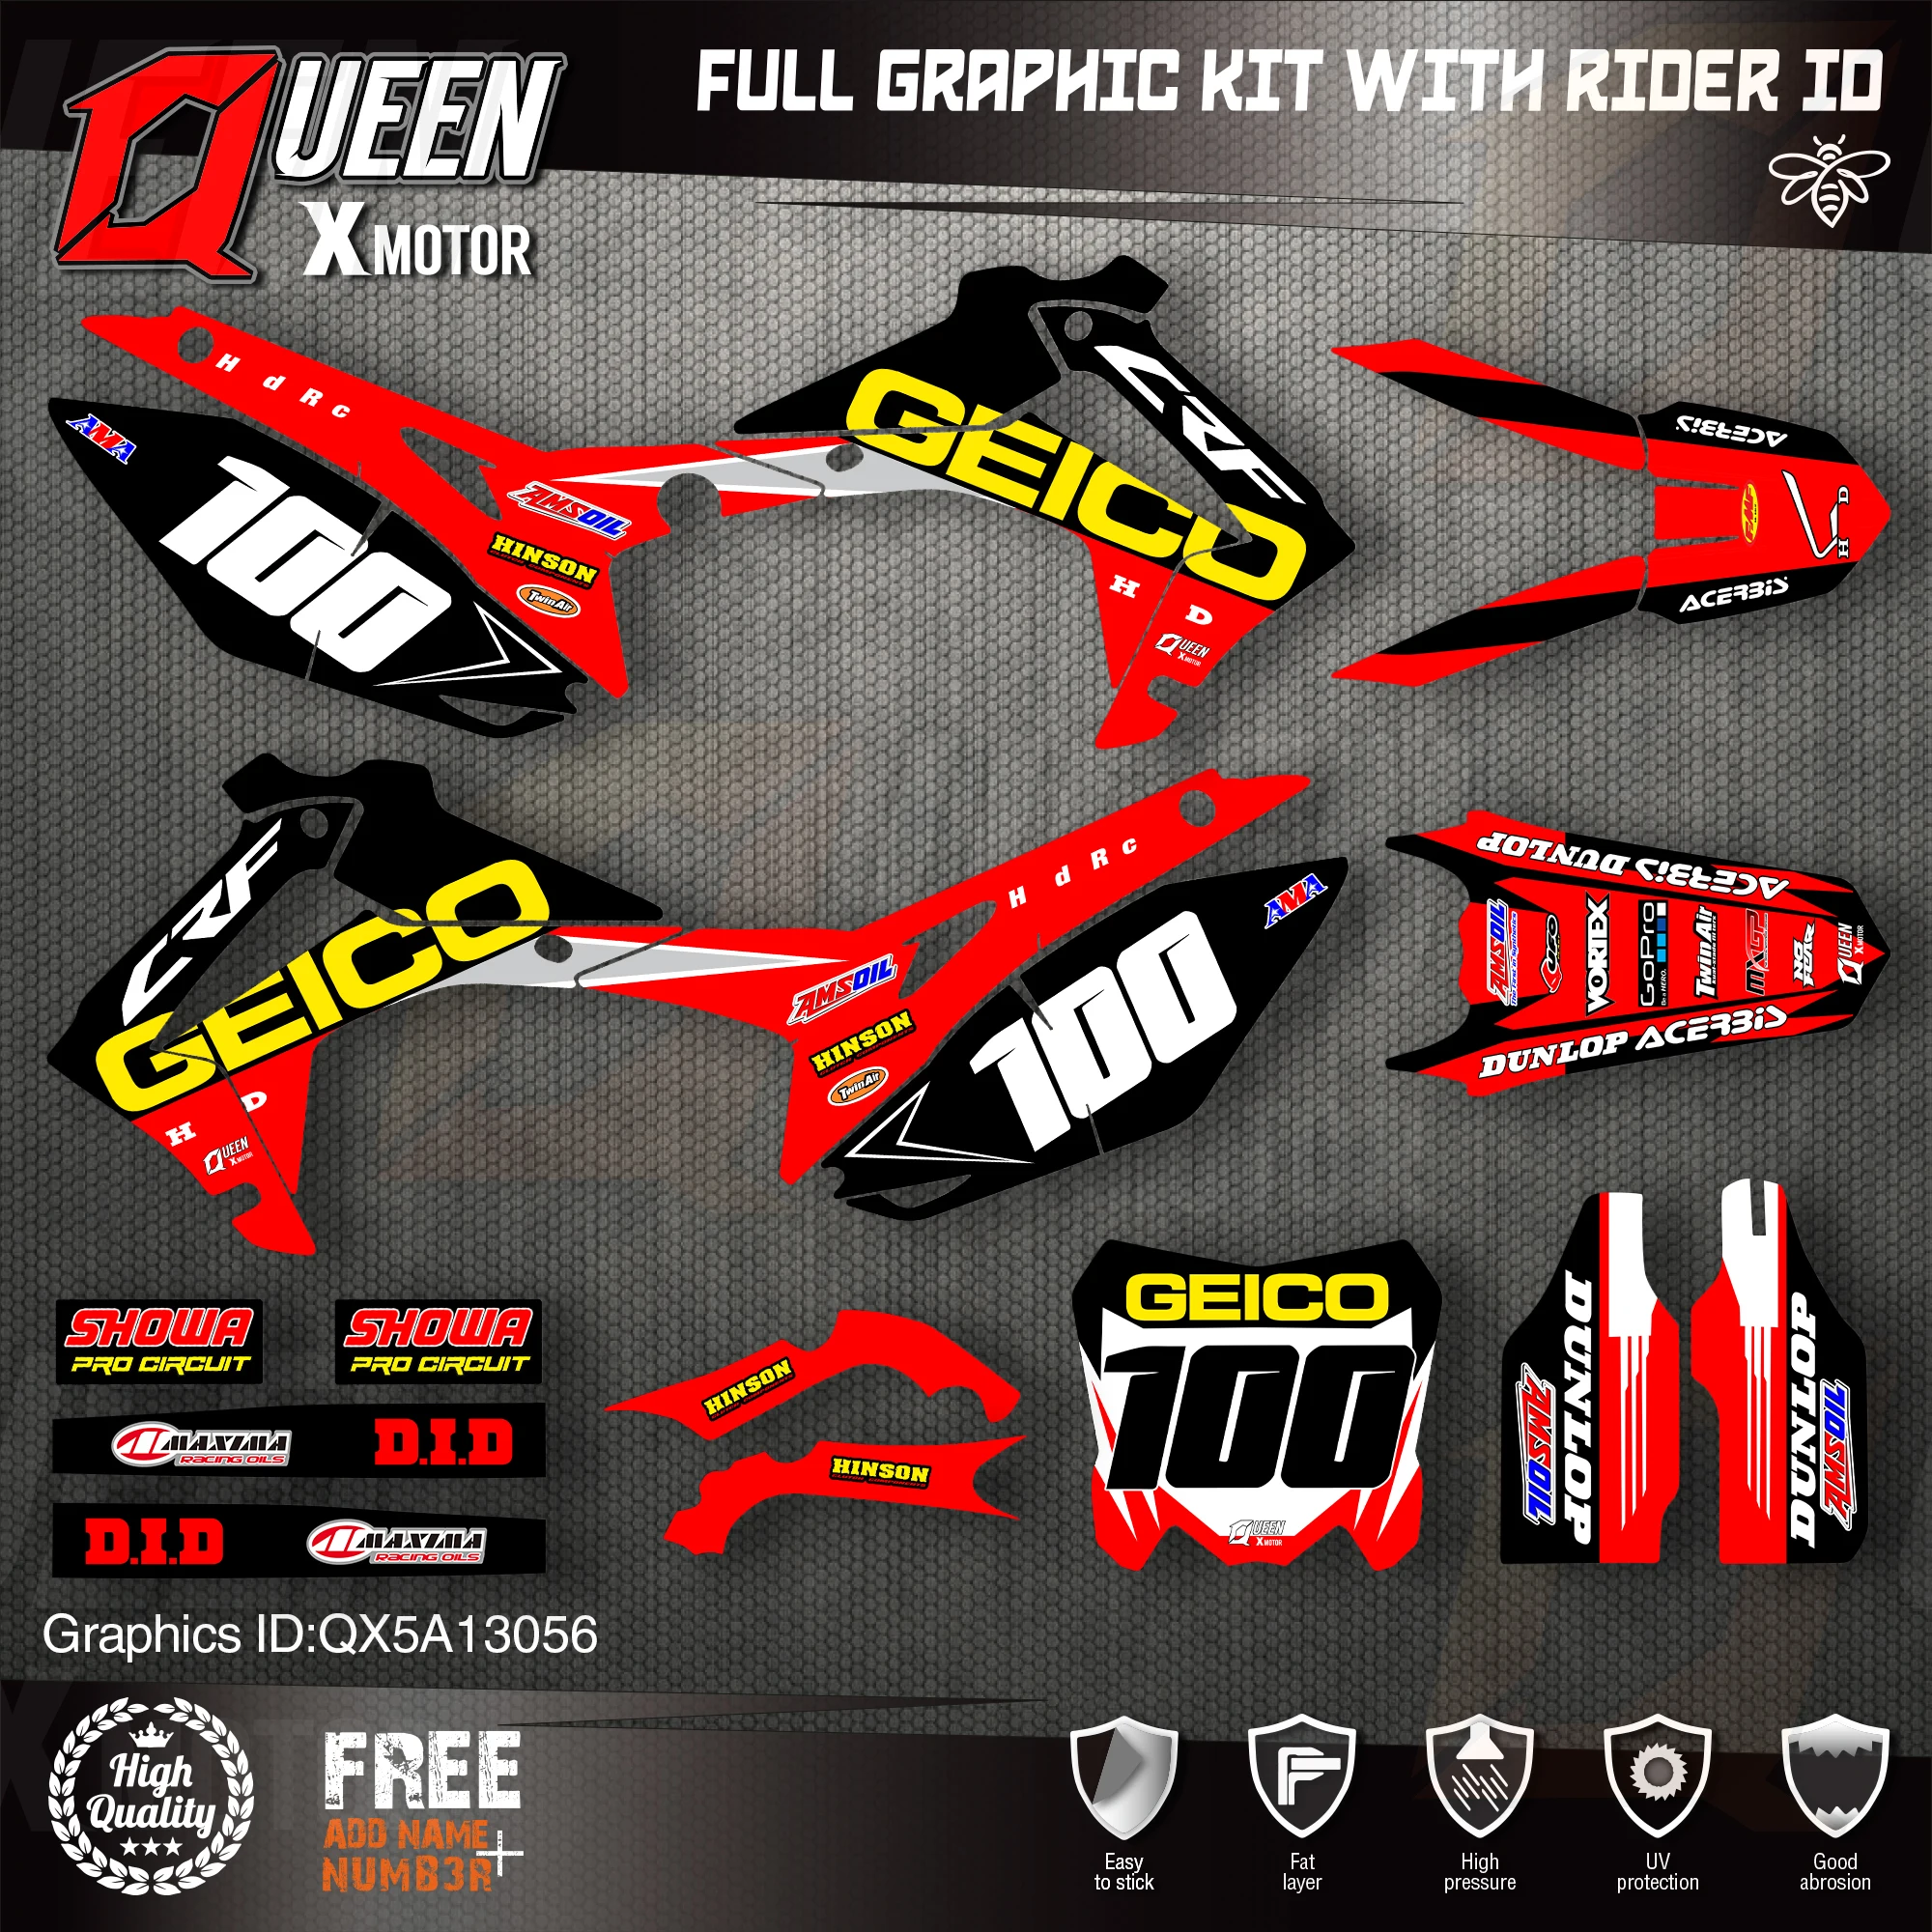 

QUEEN X MOTOR Custom Team Graphics Backgrounds Decals Stickers Kit For HONDA 2014-2017 CRF250R 2013-2016 CRF450R 056